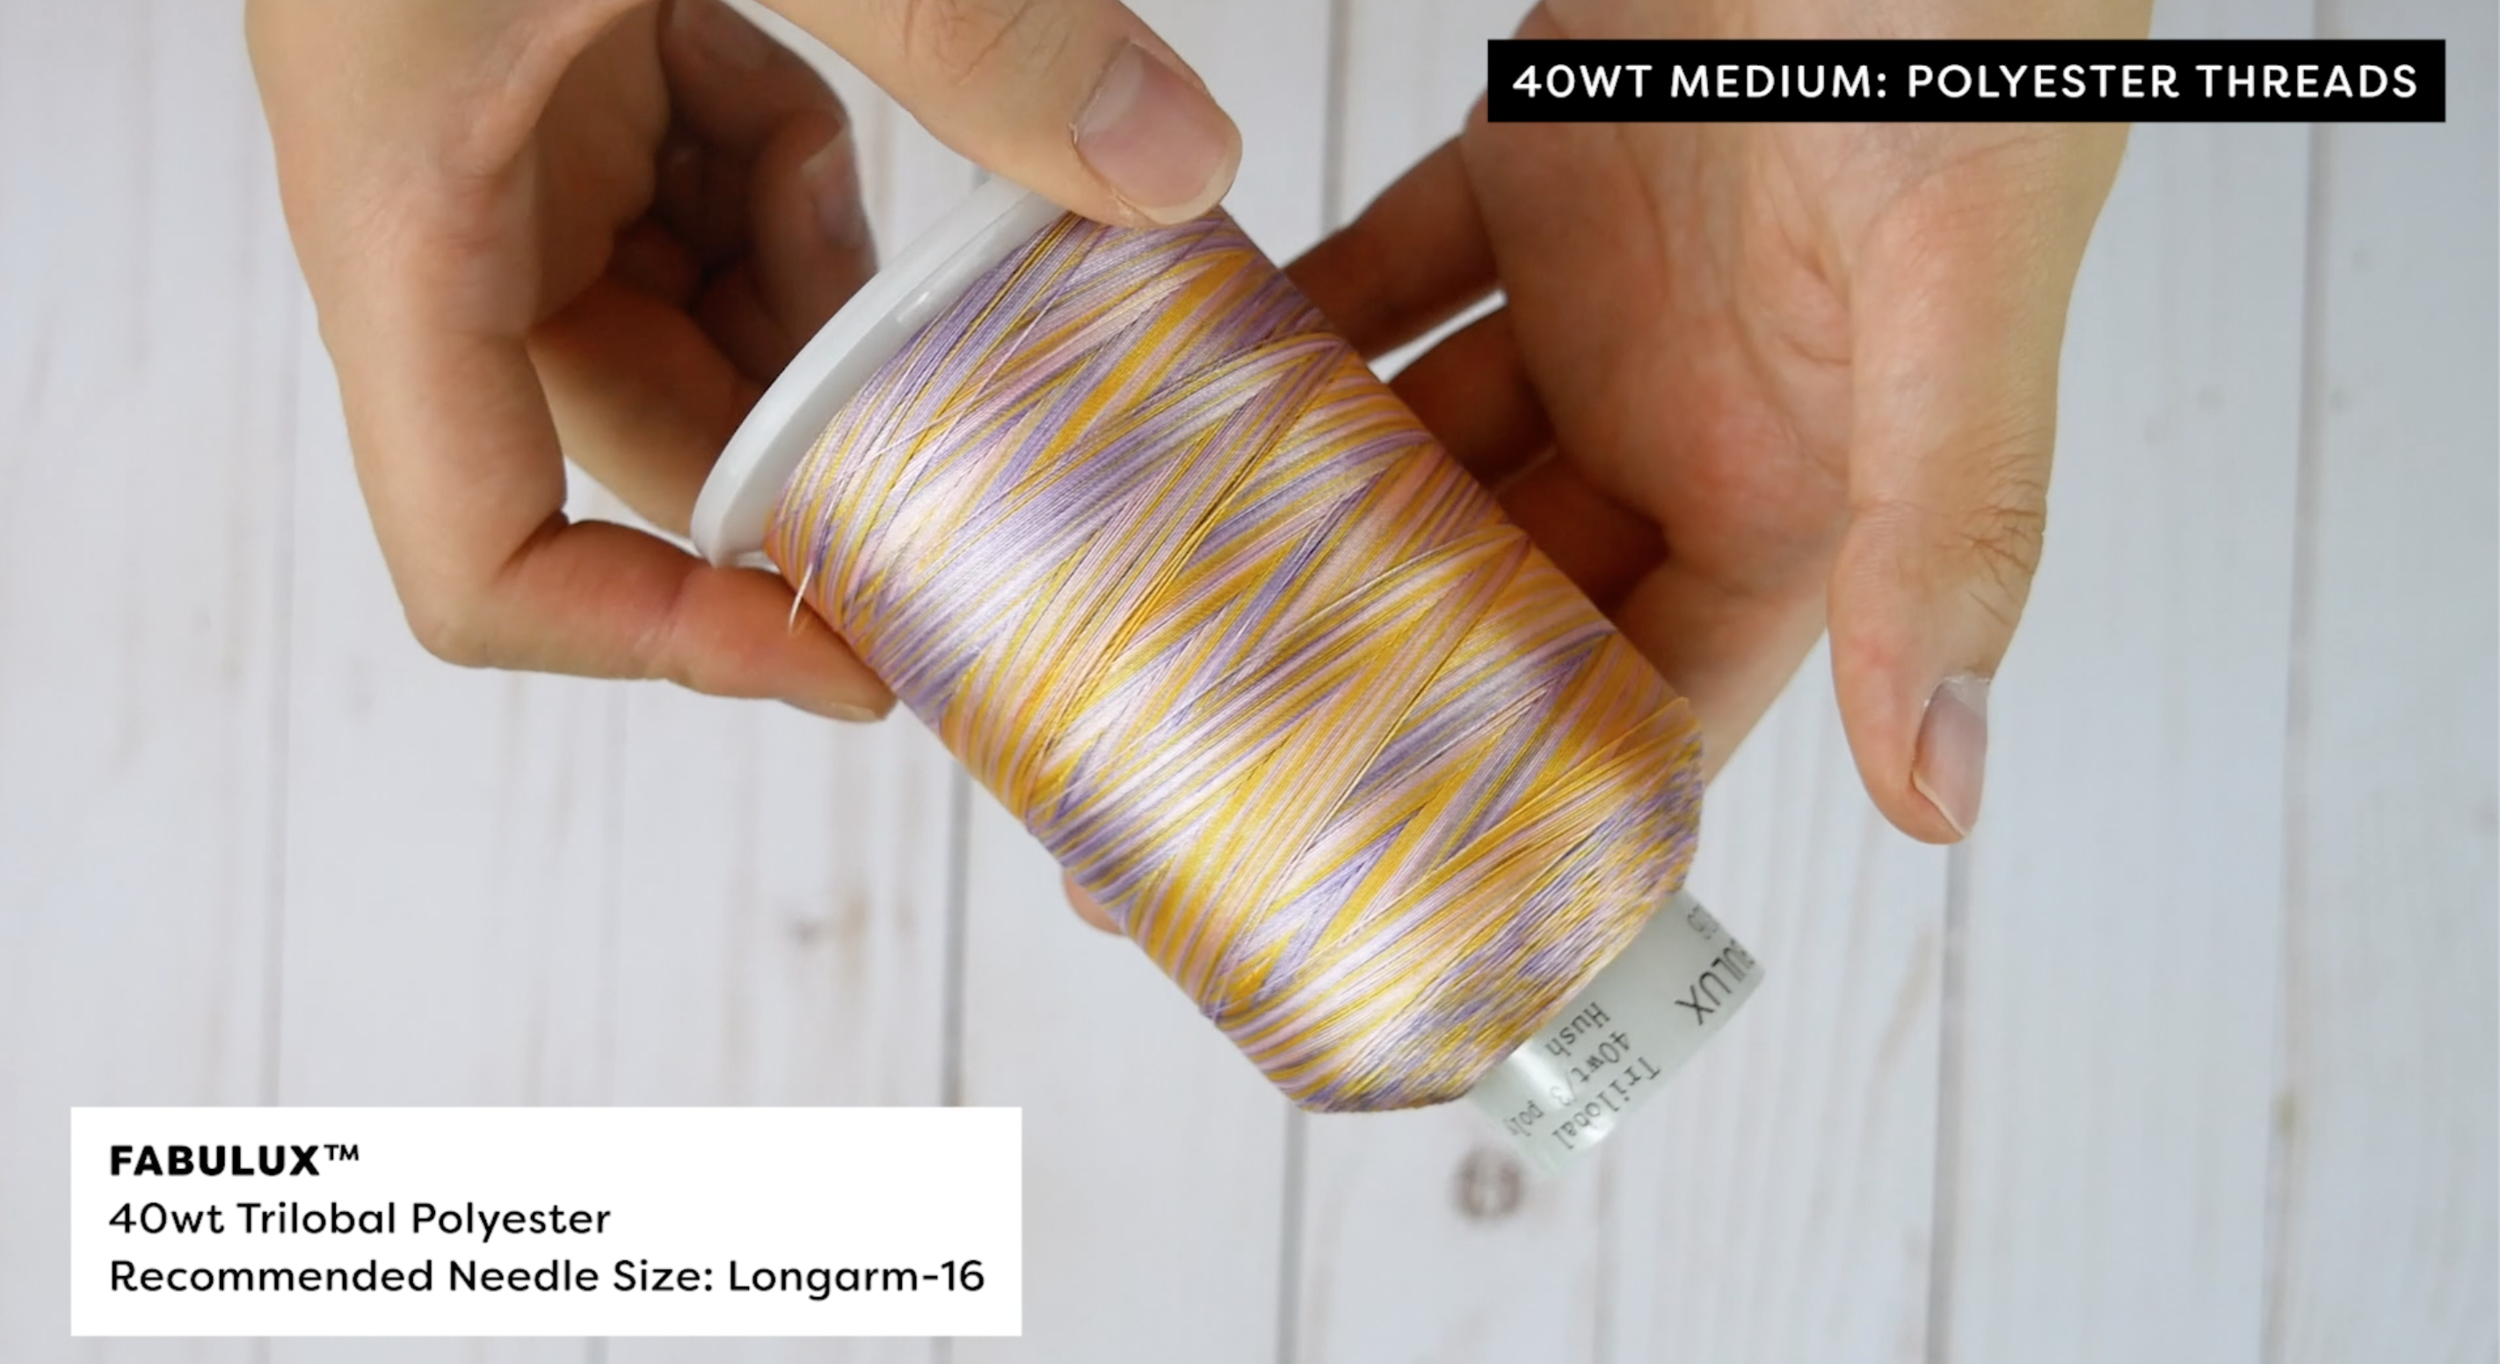 WonderFil Specialty Threads - Our Guide to The Best Longarm Quilting Threads